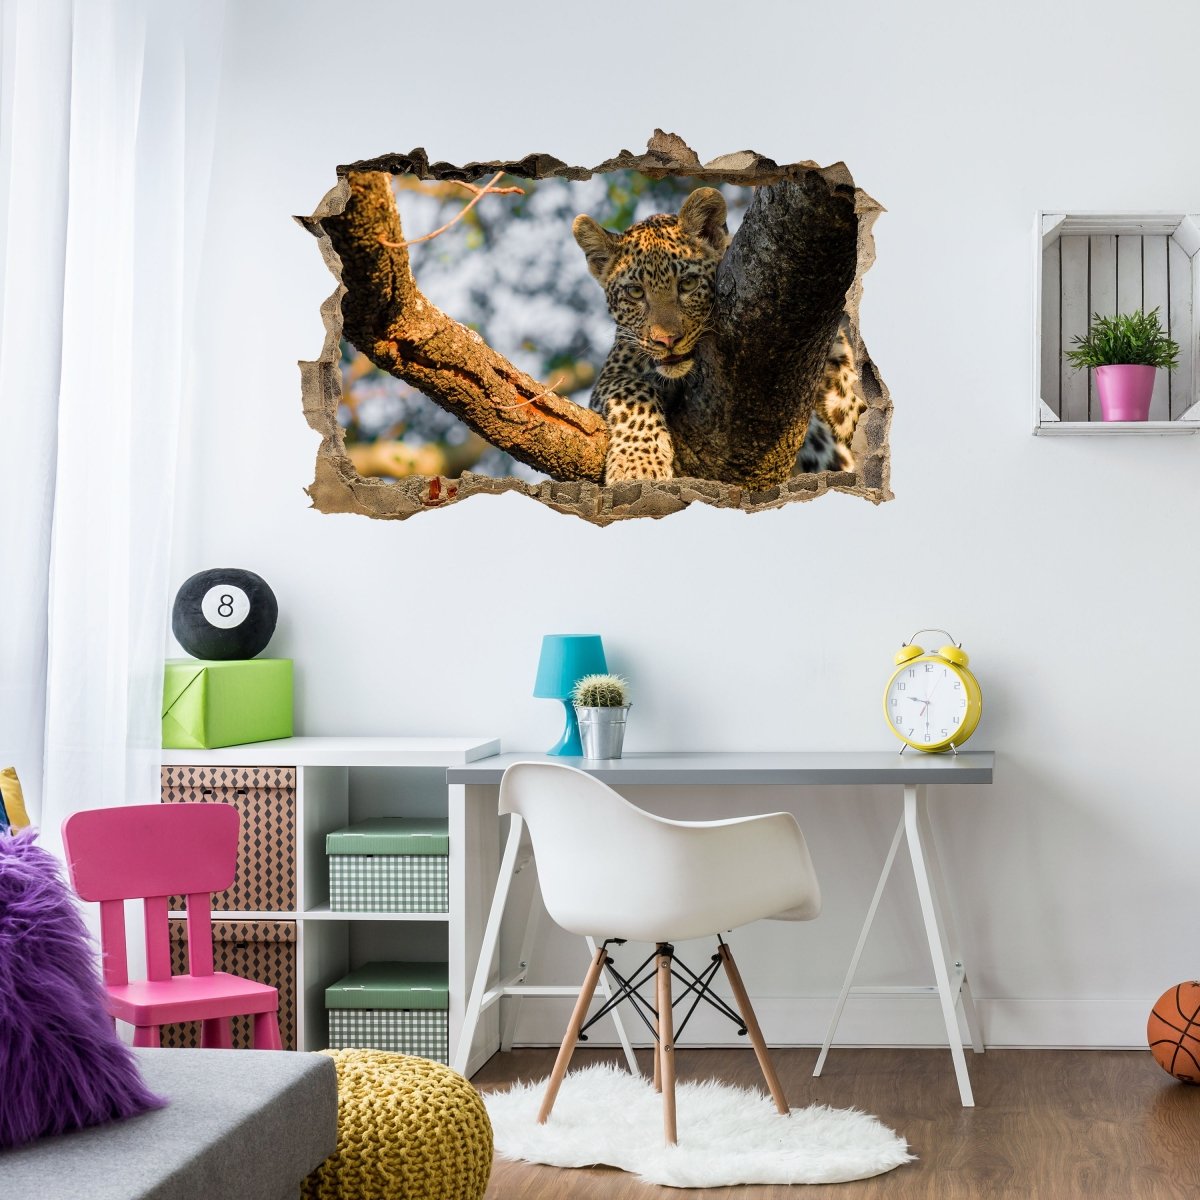 3D wall sticker leopard in South Africa - wall decal M1032